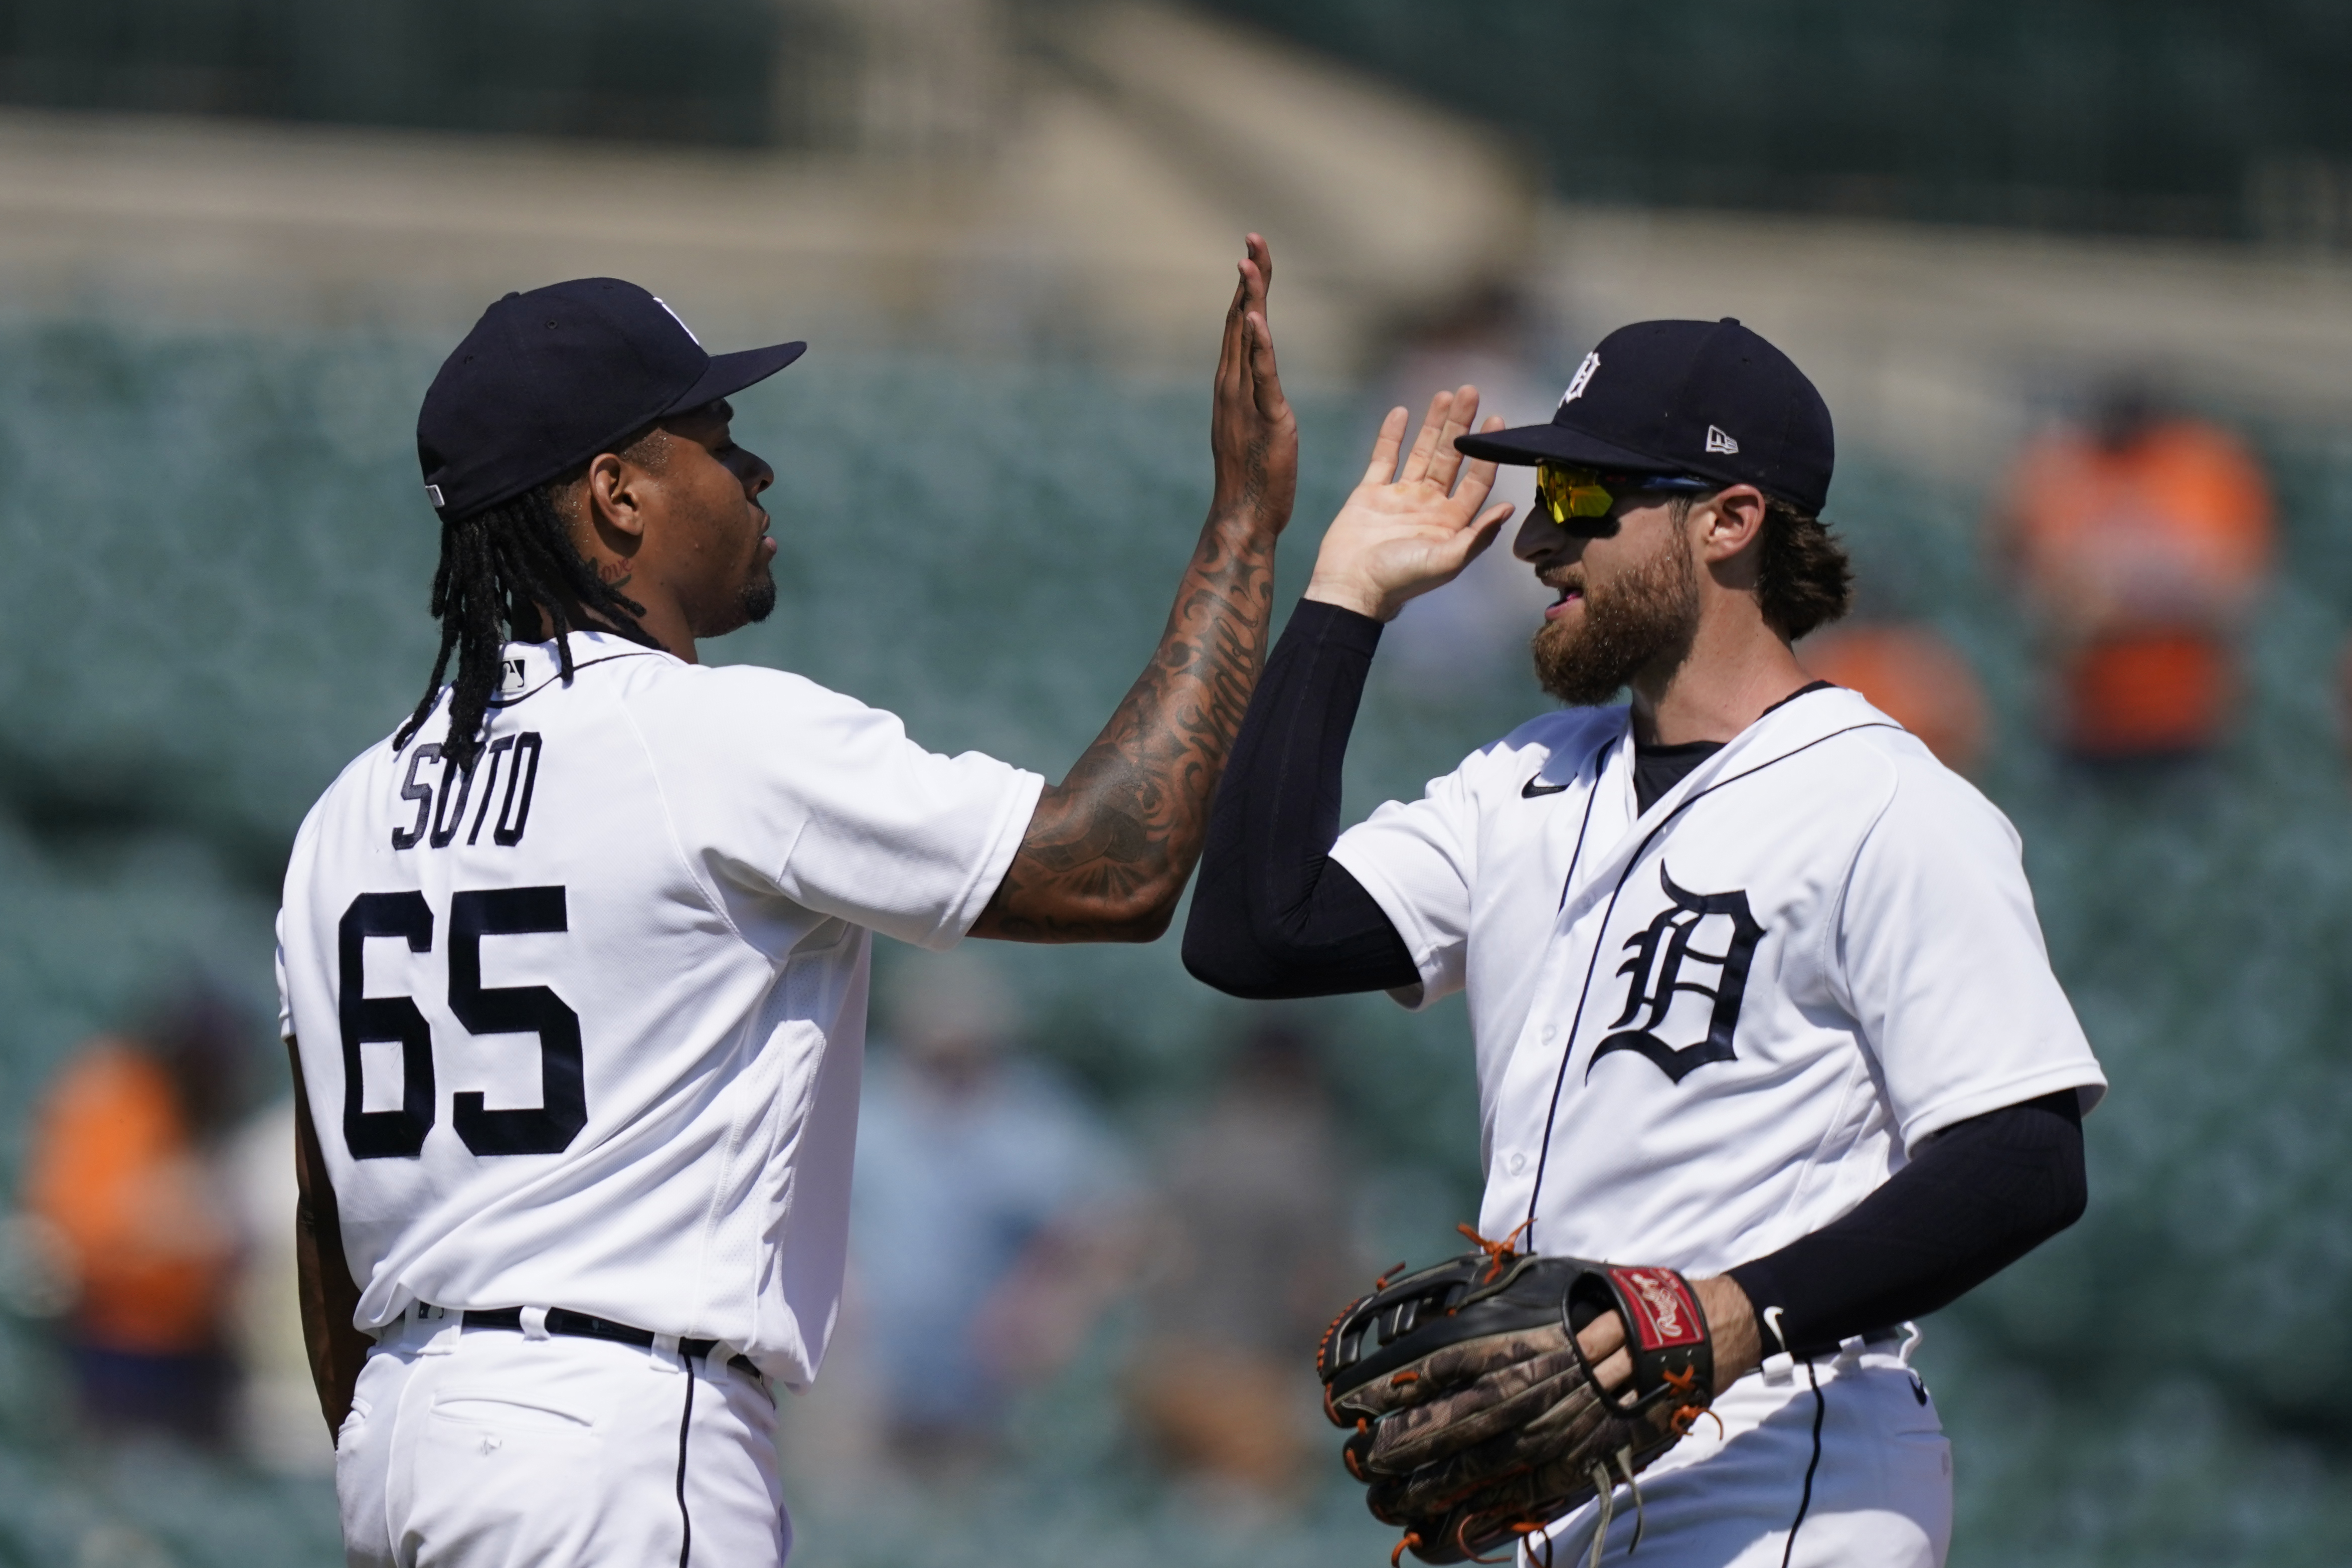 Detroit Tigers practice before Opening Day: Best photos